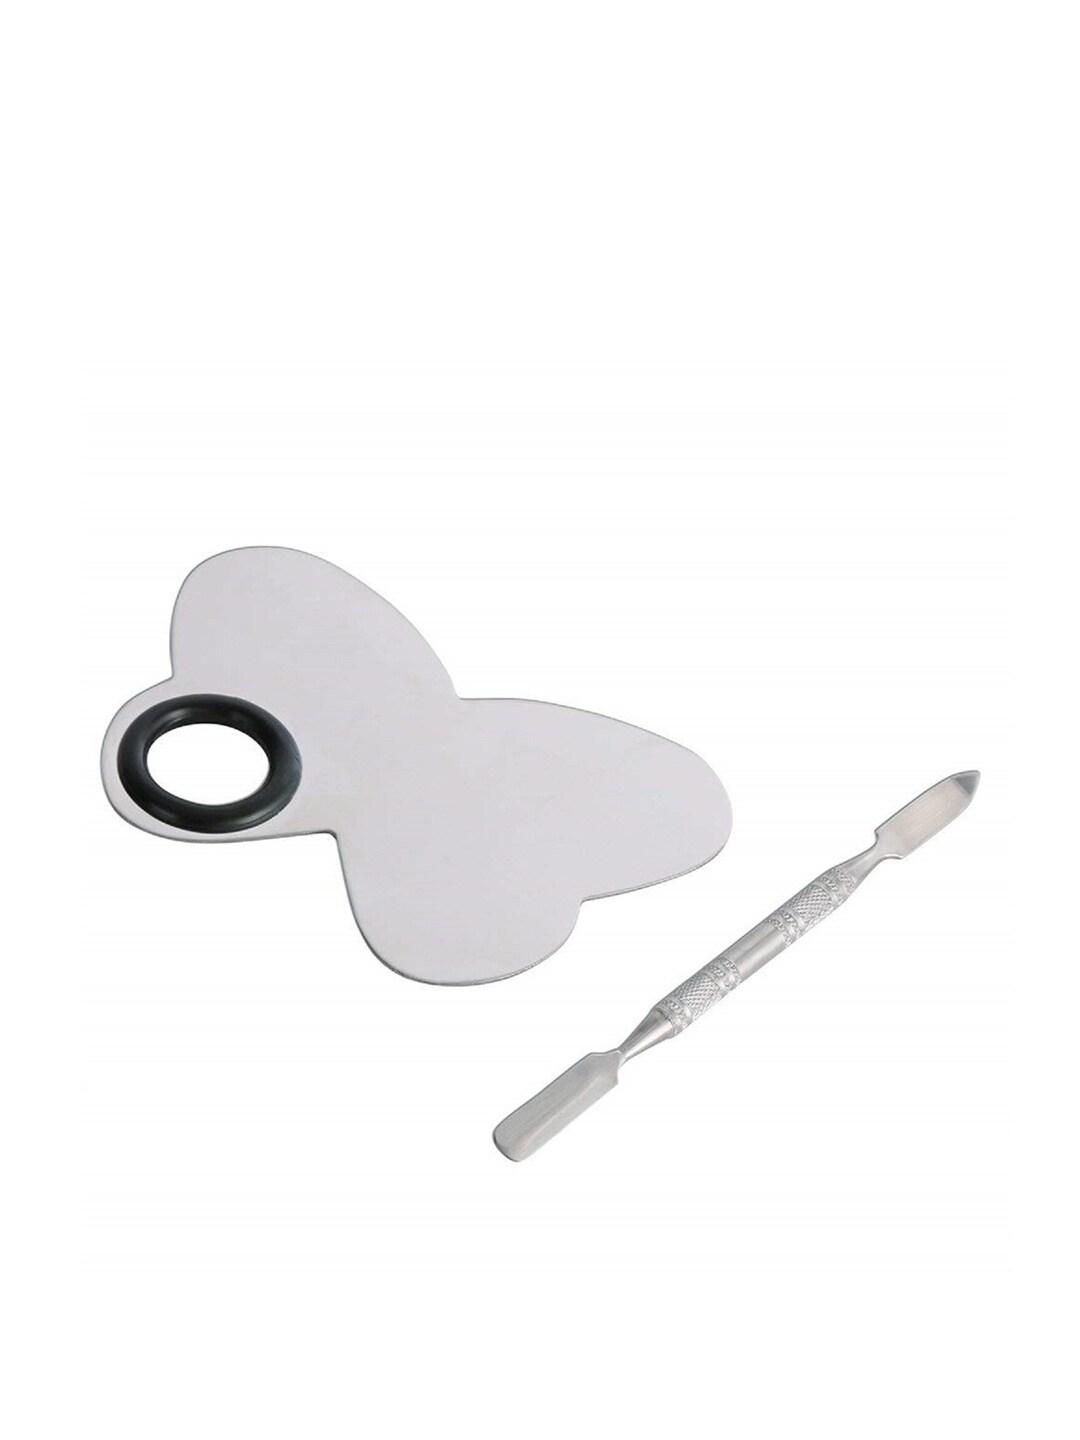 Beaute Secrets Butterfly-Shaped Makeup Blending Palette with Spatula - Silver-Toned